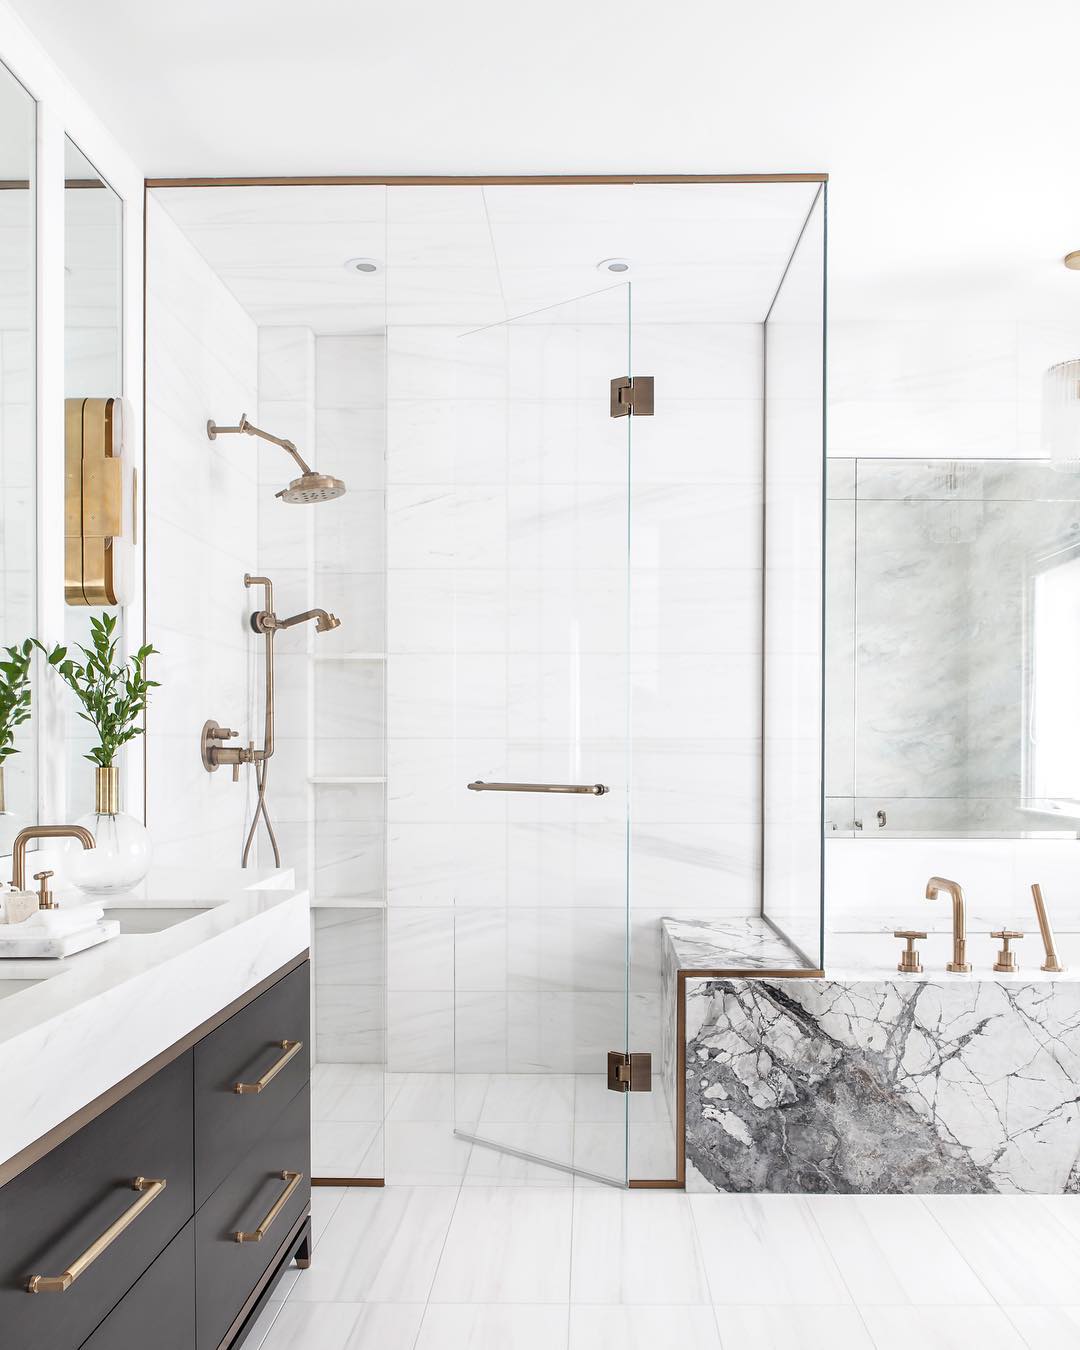 bathroom with white tile, glass shower walls, and gold hardware photo by Instagram user @kielyramosphoto